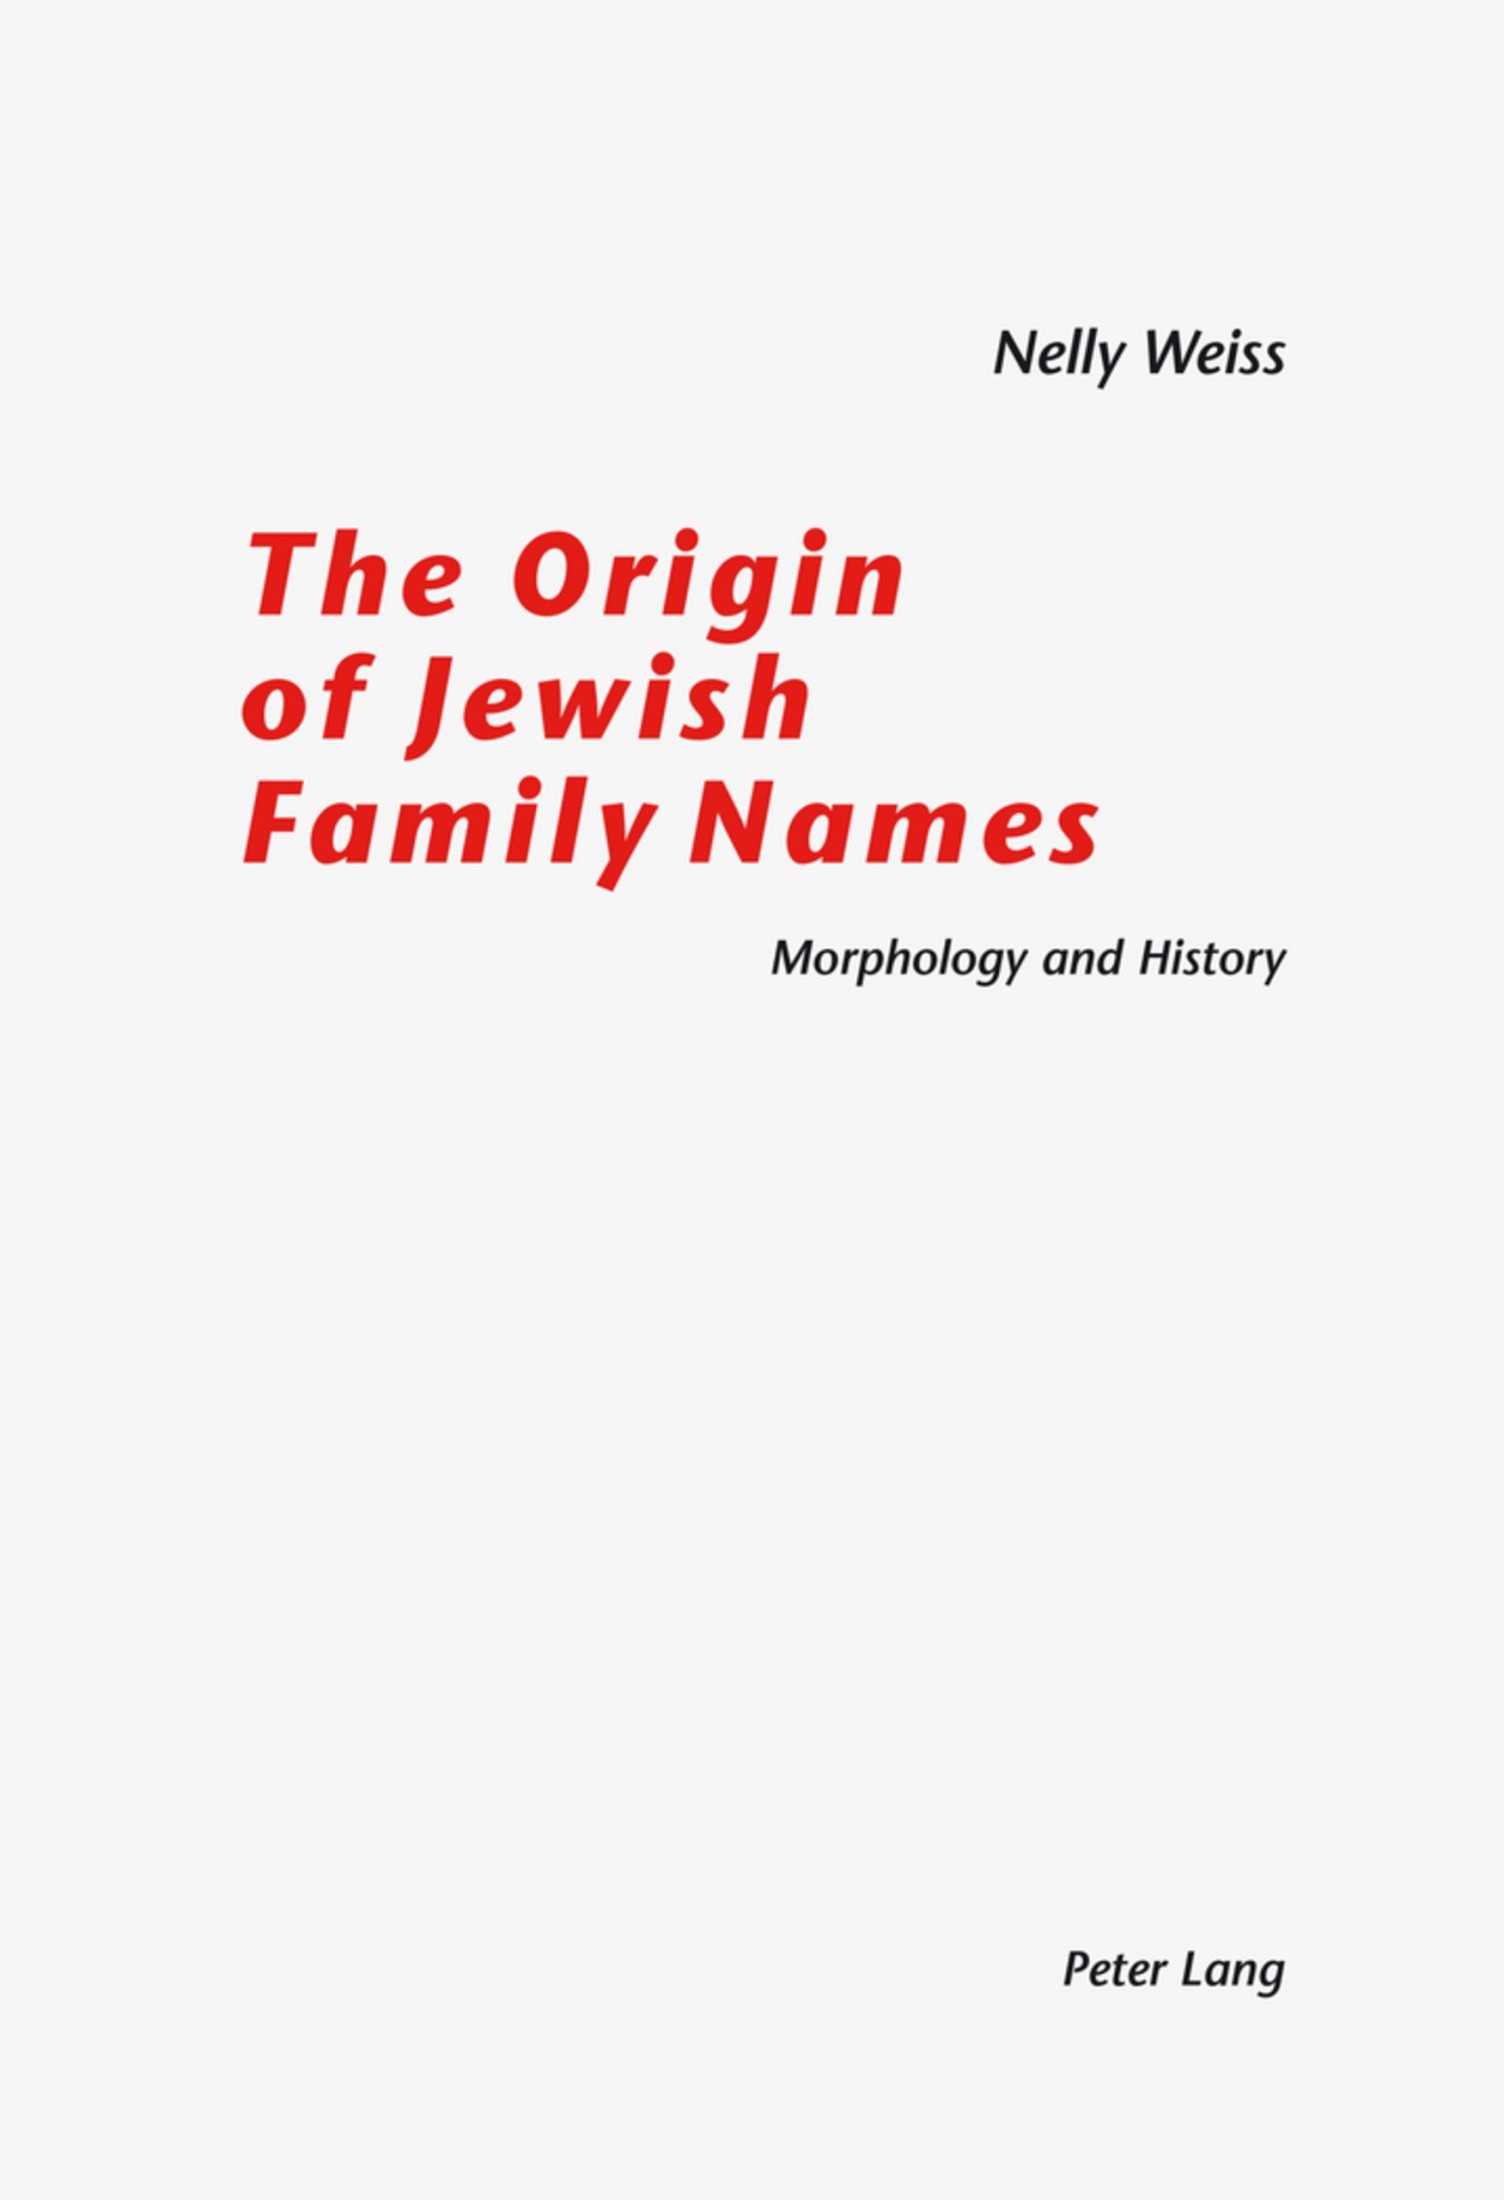 The Origin of Jewish Family Names: Morphology and History